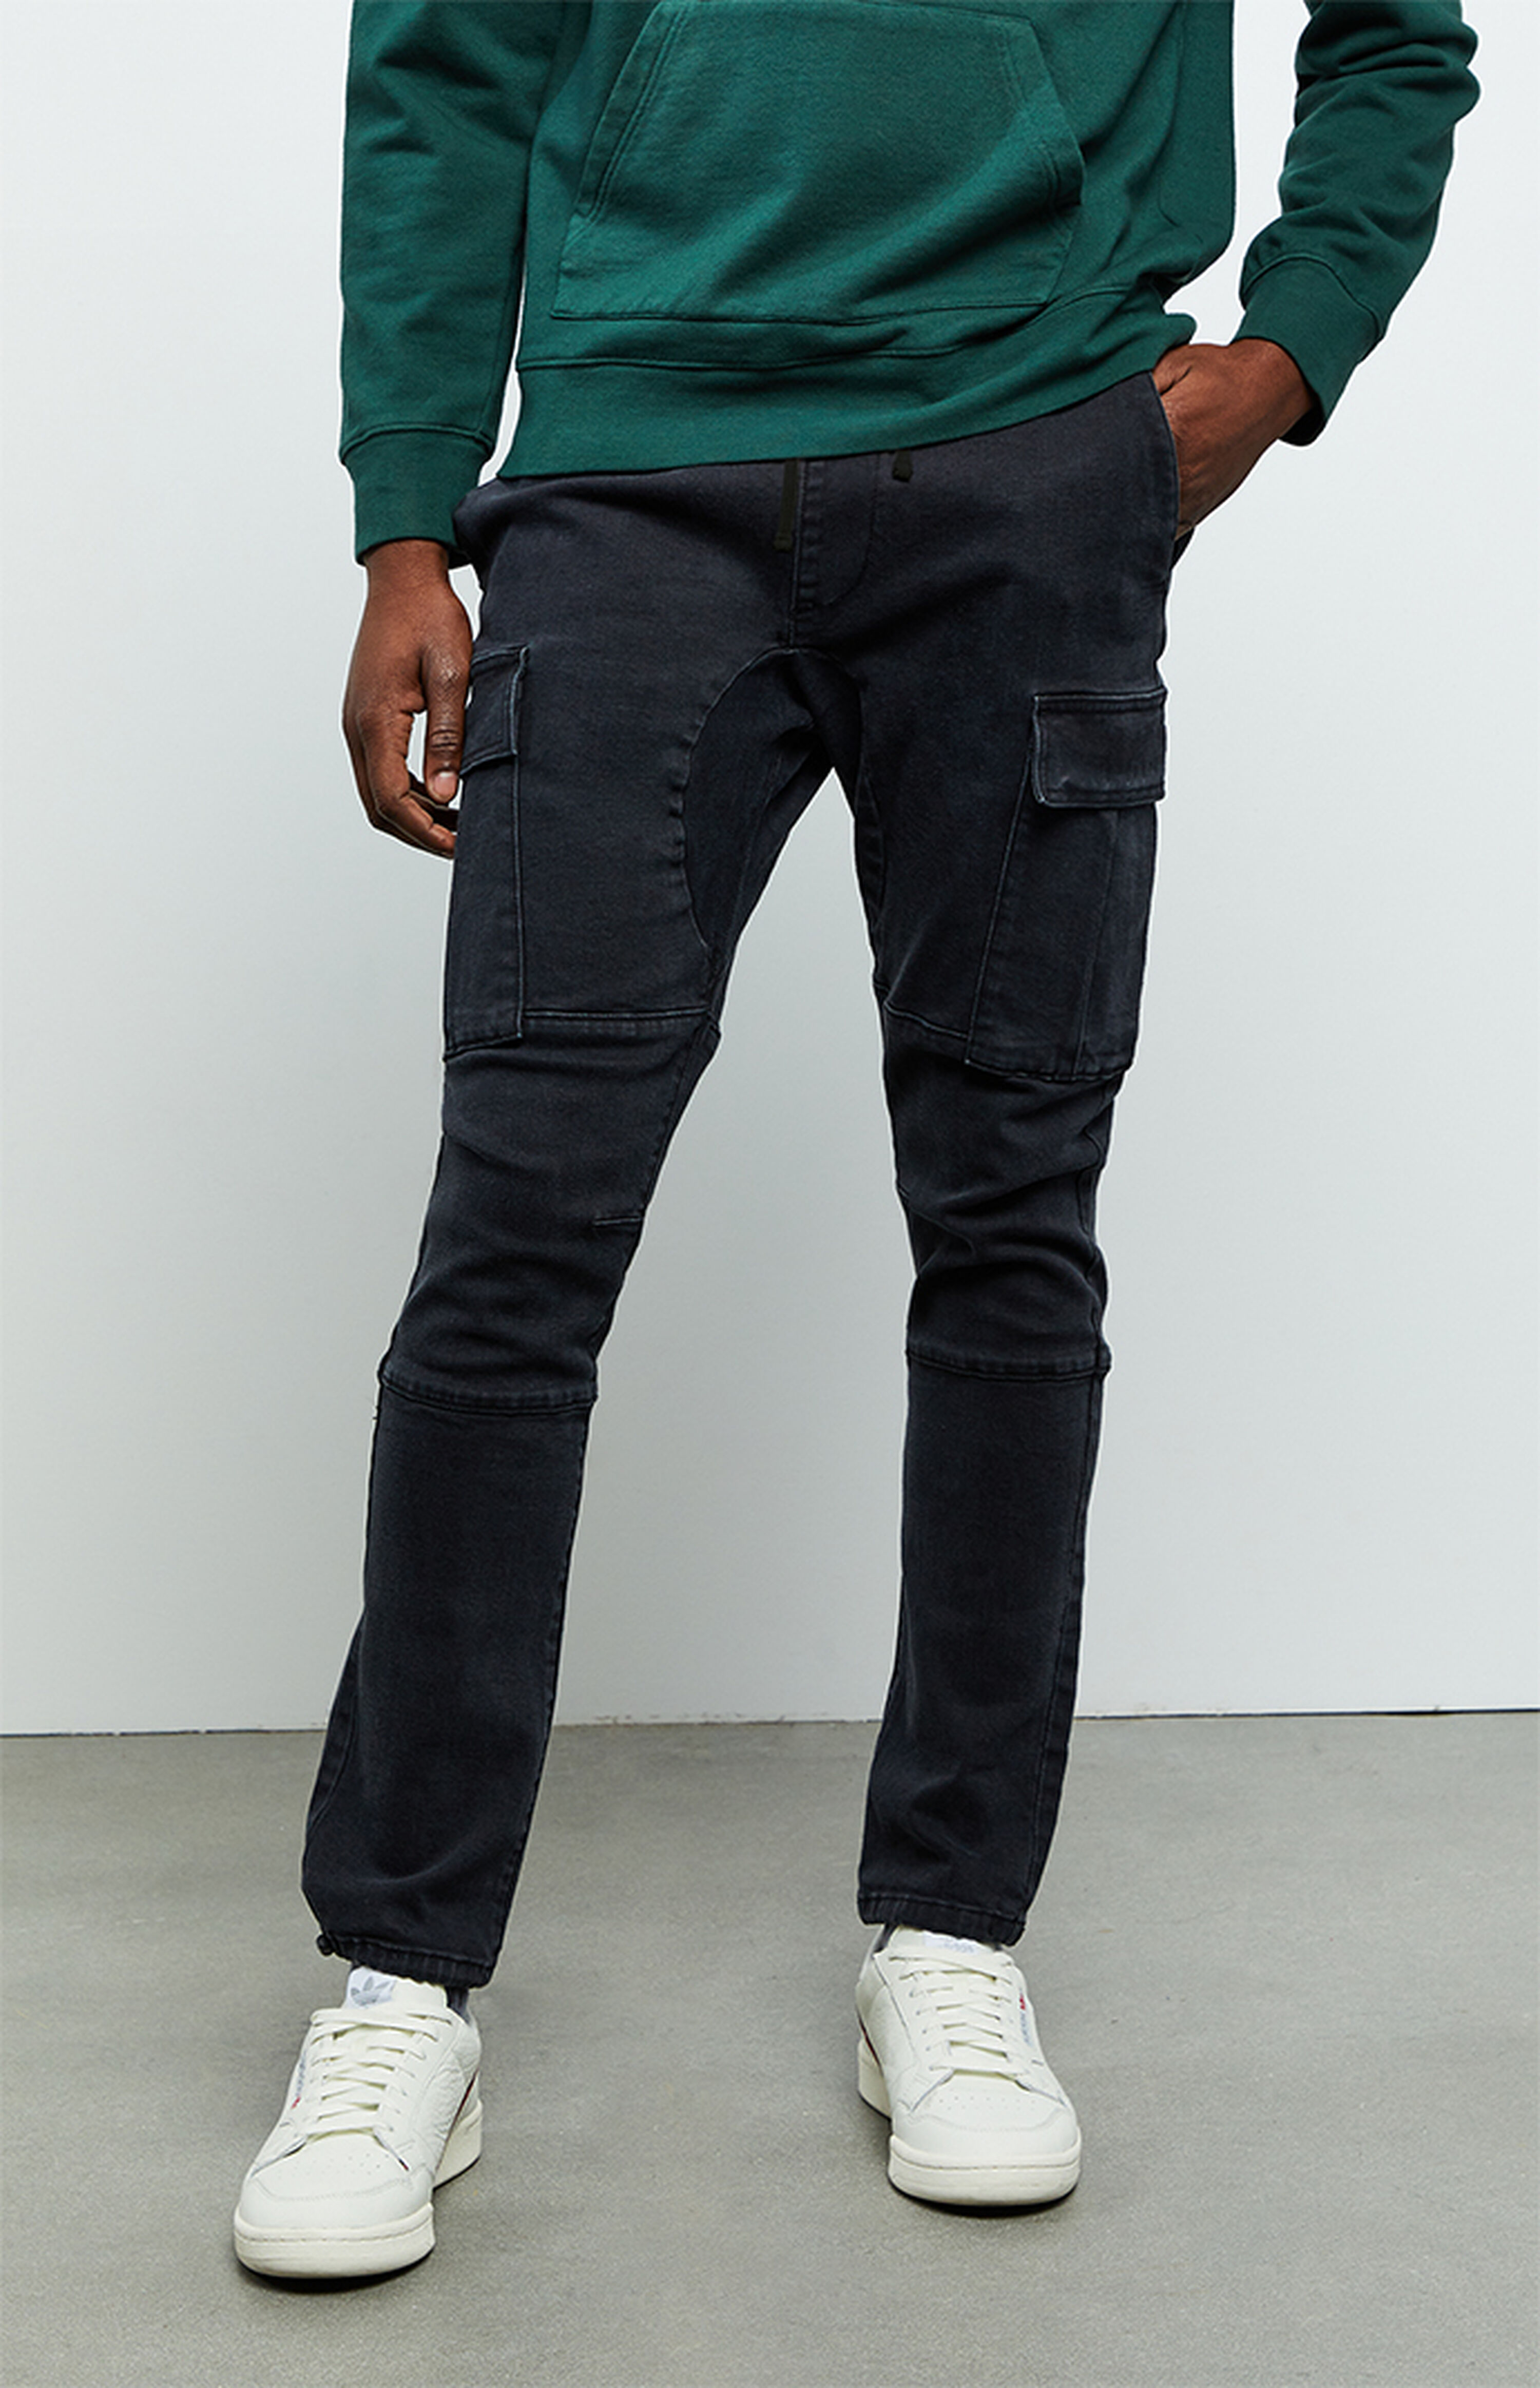 Workwear Washed Black Slim Fit Cargo Pants | PacSun